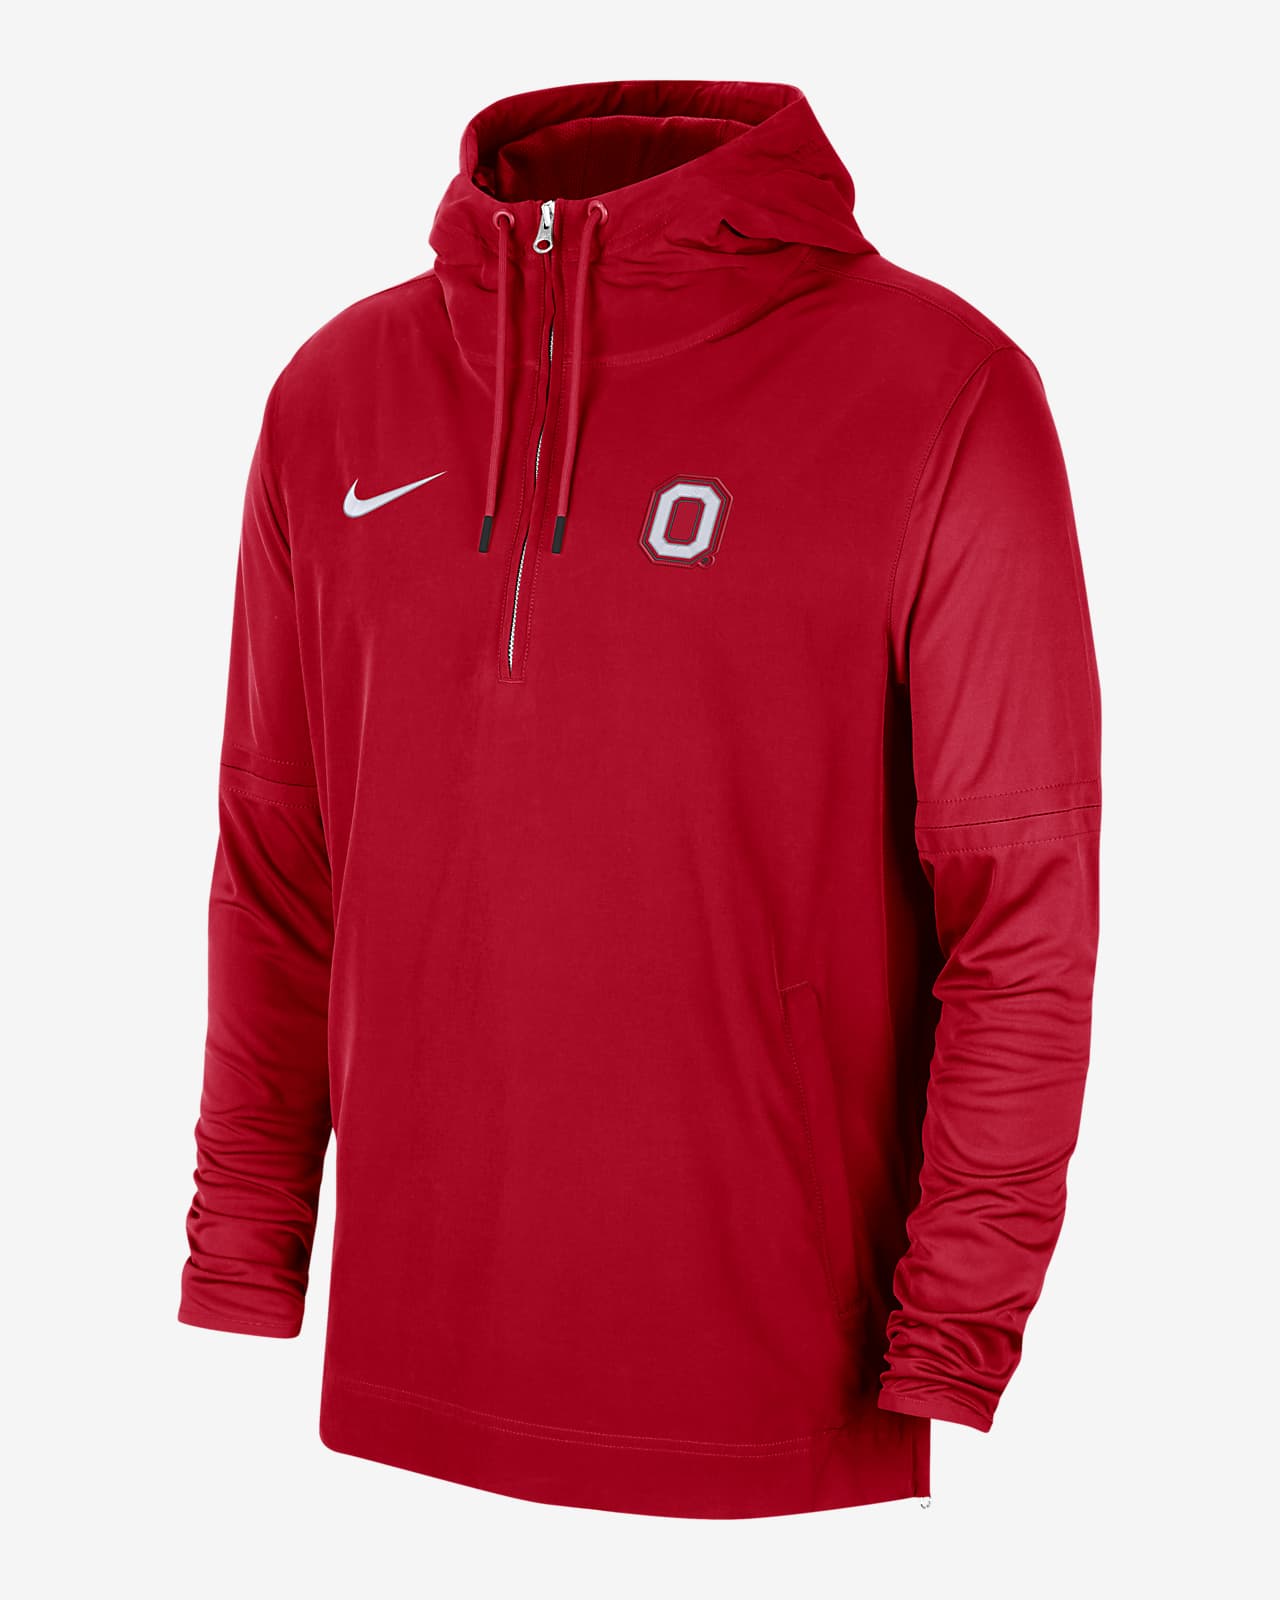 Ohio State Player Men's Nike College Long-Sleeve Woven Jacket